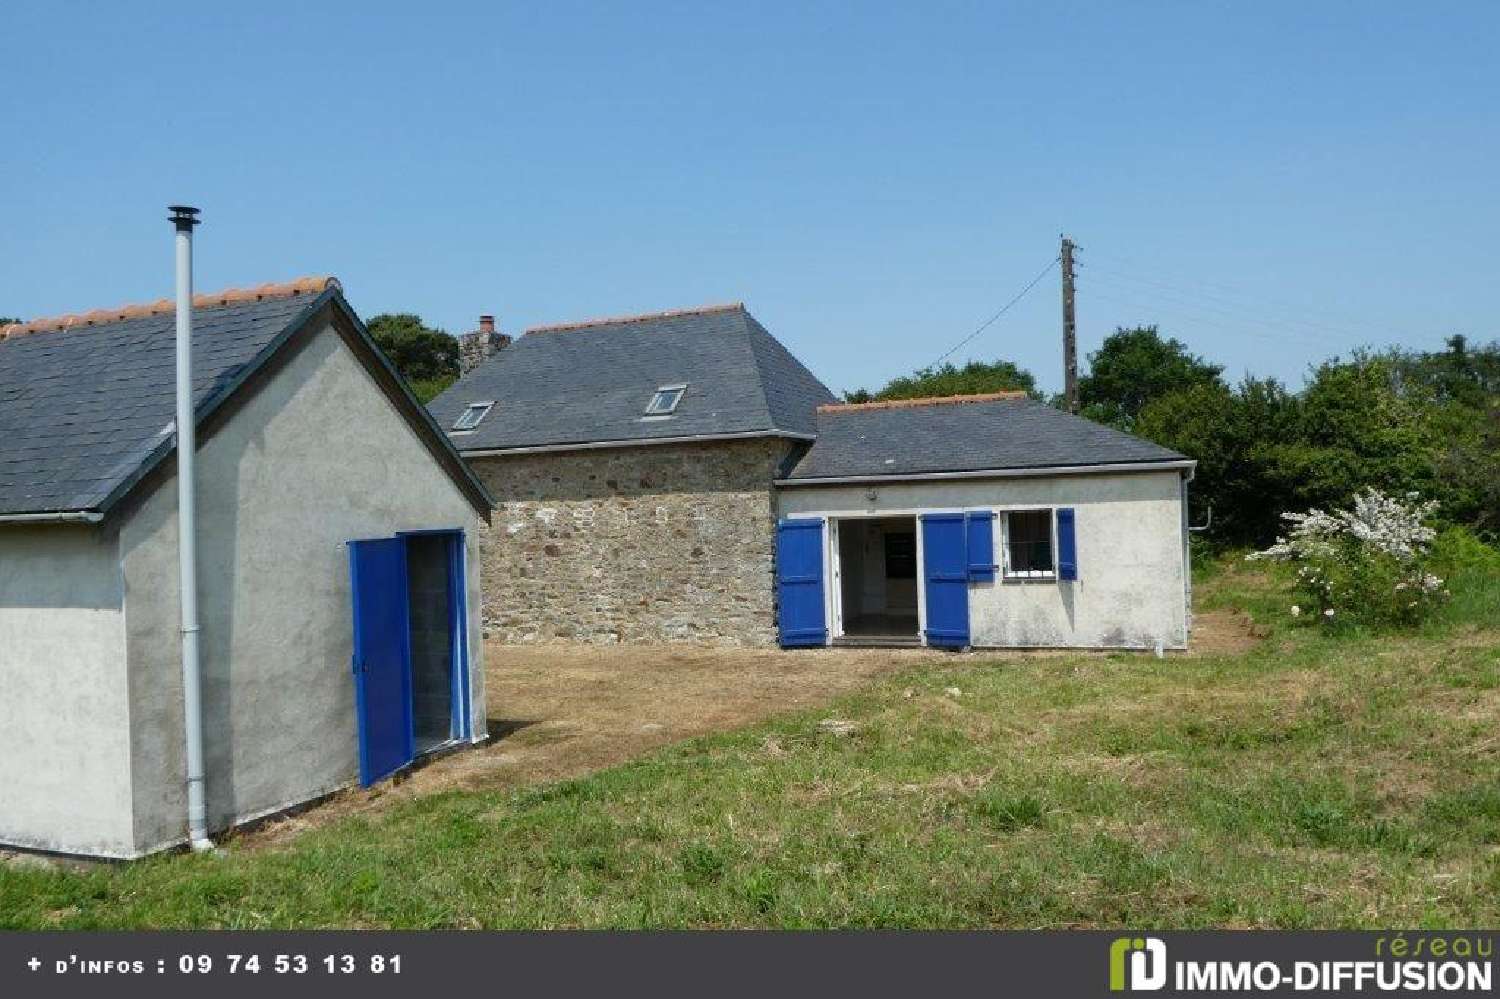  for sale house Plougonven Finistère 1